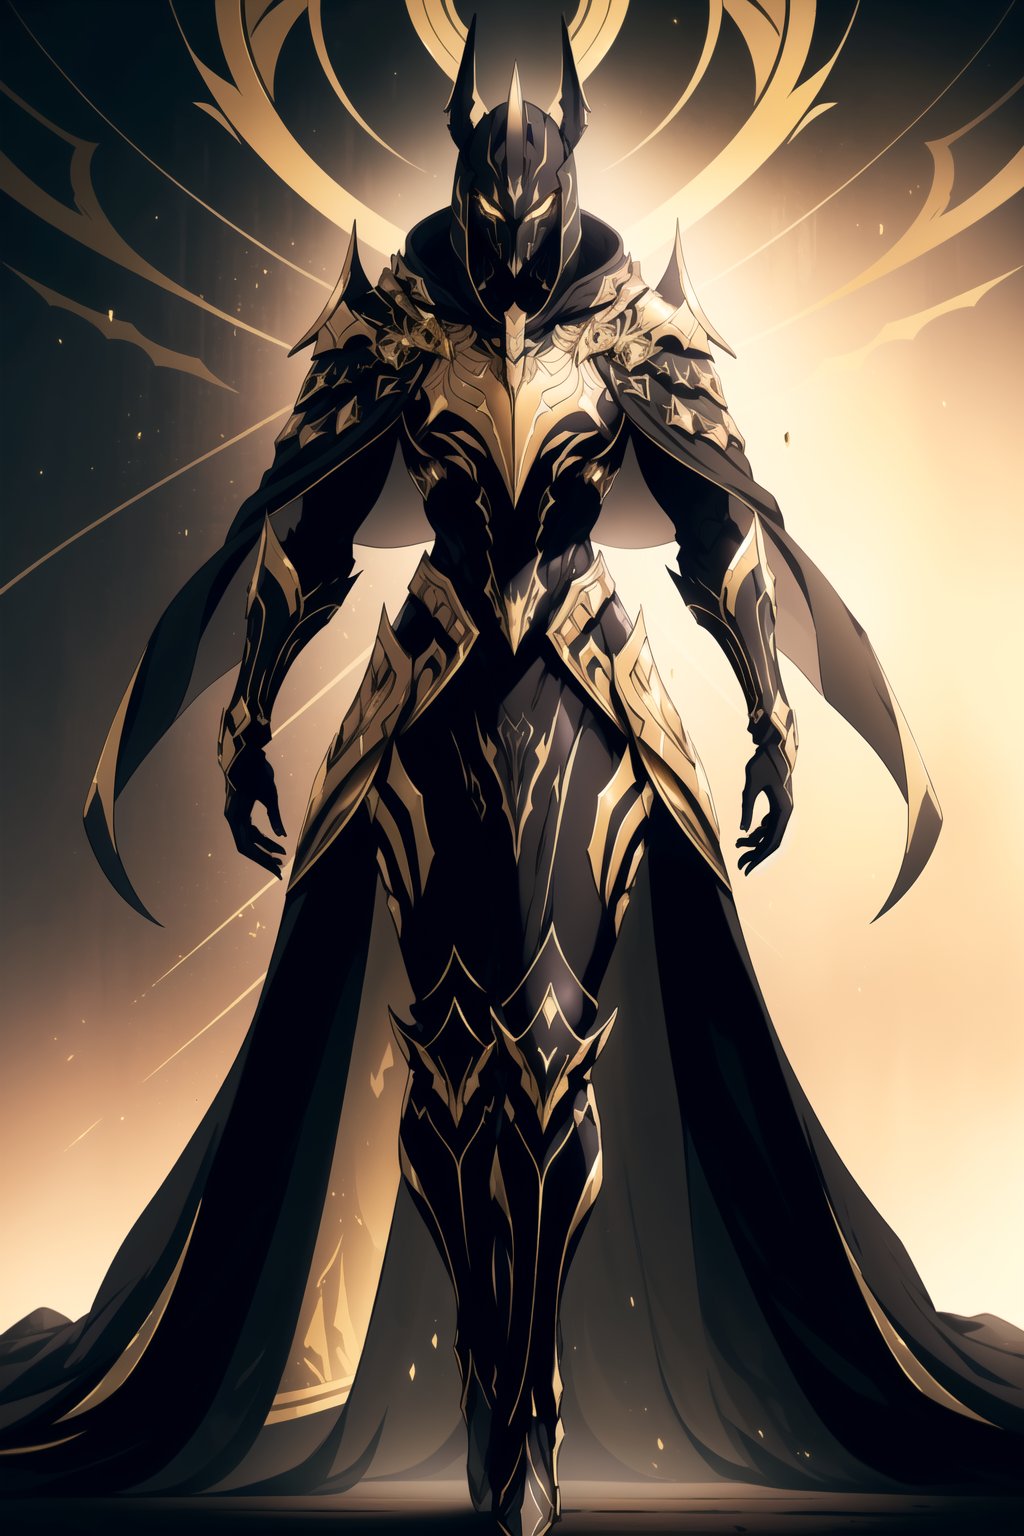 (Masterpiece, Best Quality), (Anubis Warrior in Warframe Style Armor), (Glowing Golden Eyes), (Wearing Black and Gold Anubis-Themed Armor and Black Flowing Cloak:1.4), (Barren Desert at Noon:1.2), (Dynamic Pose:1.4), Centered, (Half Body Shot:1.4), (From Front Shot:1.2), Insane Details, Intricate Face Detail, Intricate Hand Details, Cinematic Shot and Lighting, Realistic and Vibrant Colors, Sharp Focus, Ultra Detailed, Realistic Images, Depth of Field, Incredibly Realistic Environment and Scene, Master Composition and Cinematography, castlevania style,castlevania style,WARFRAME